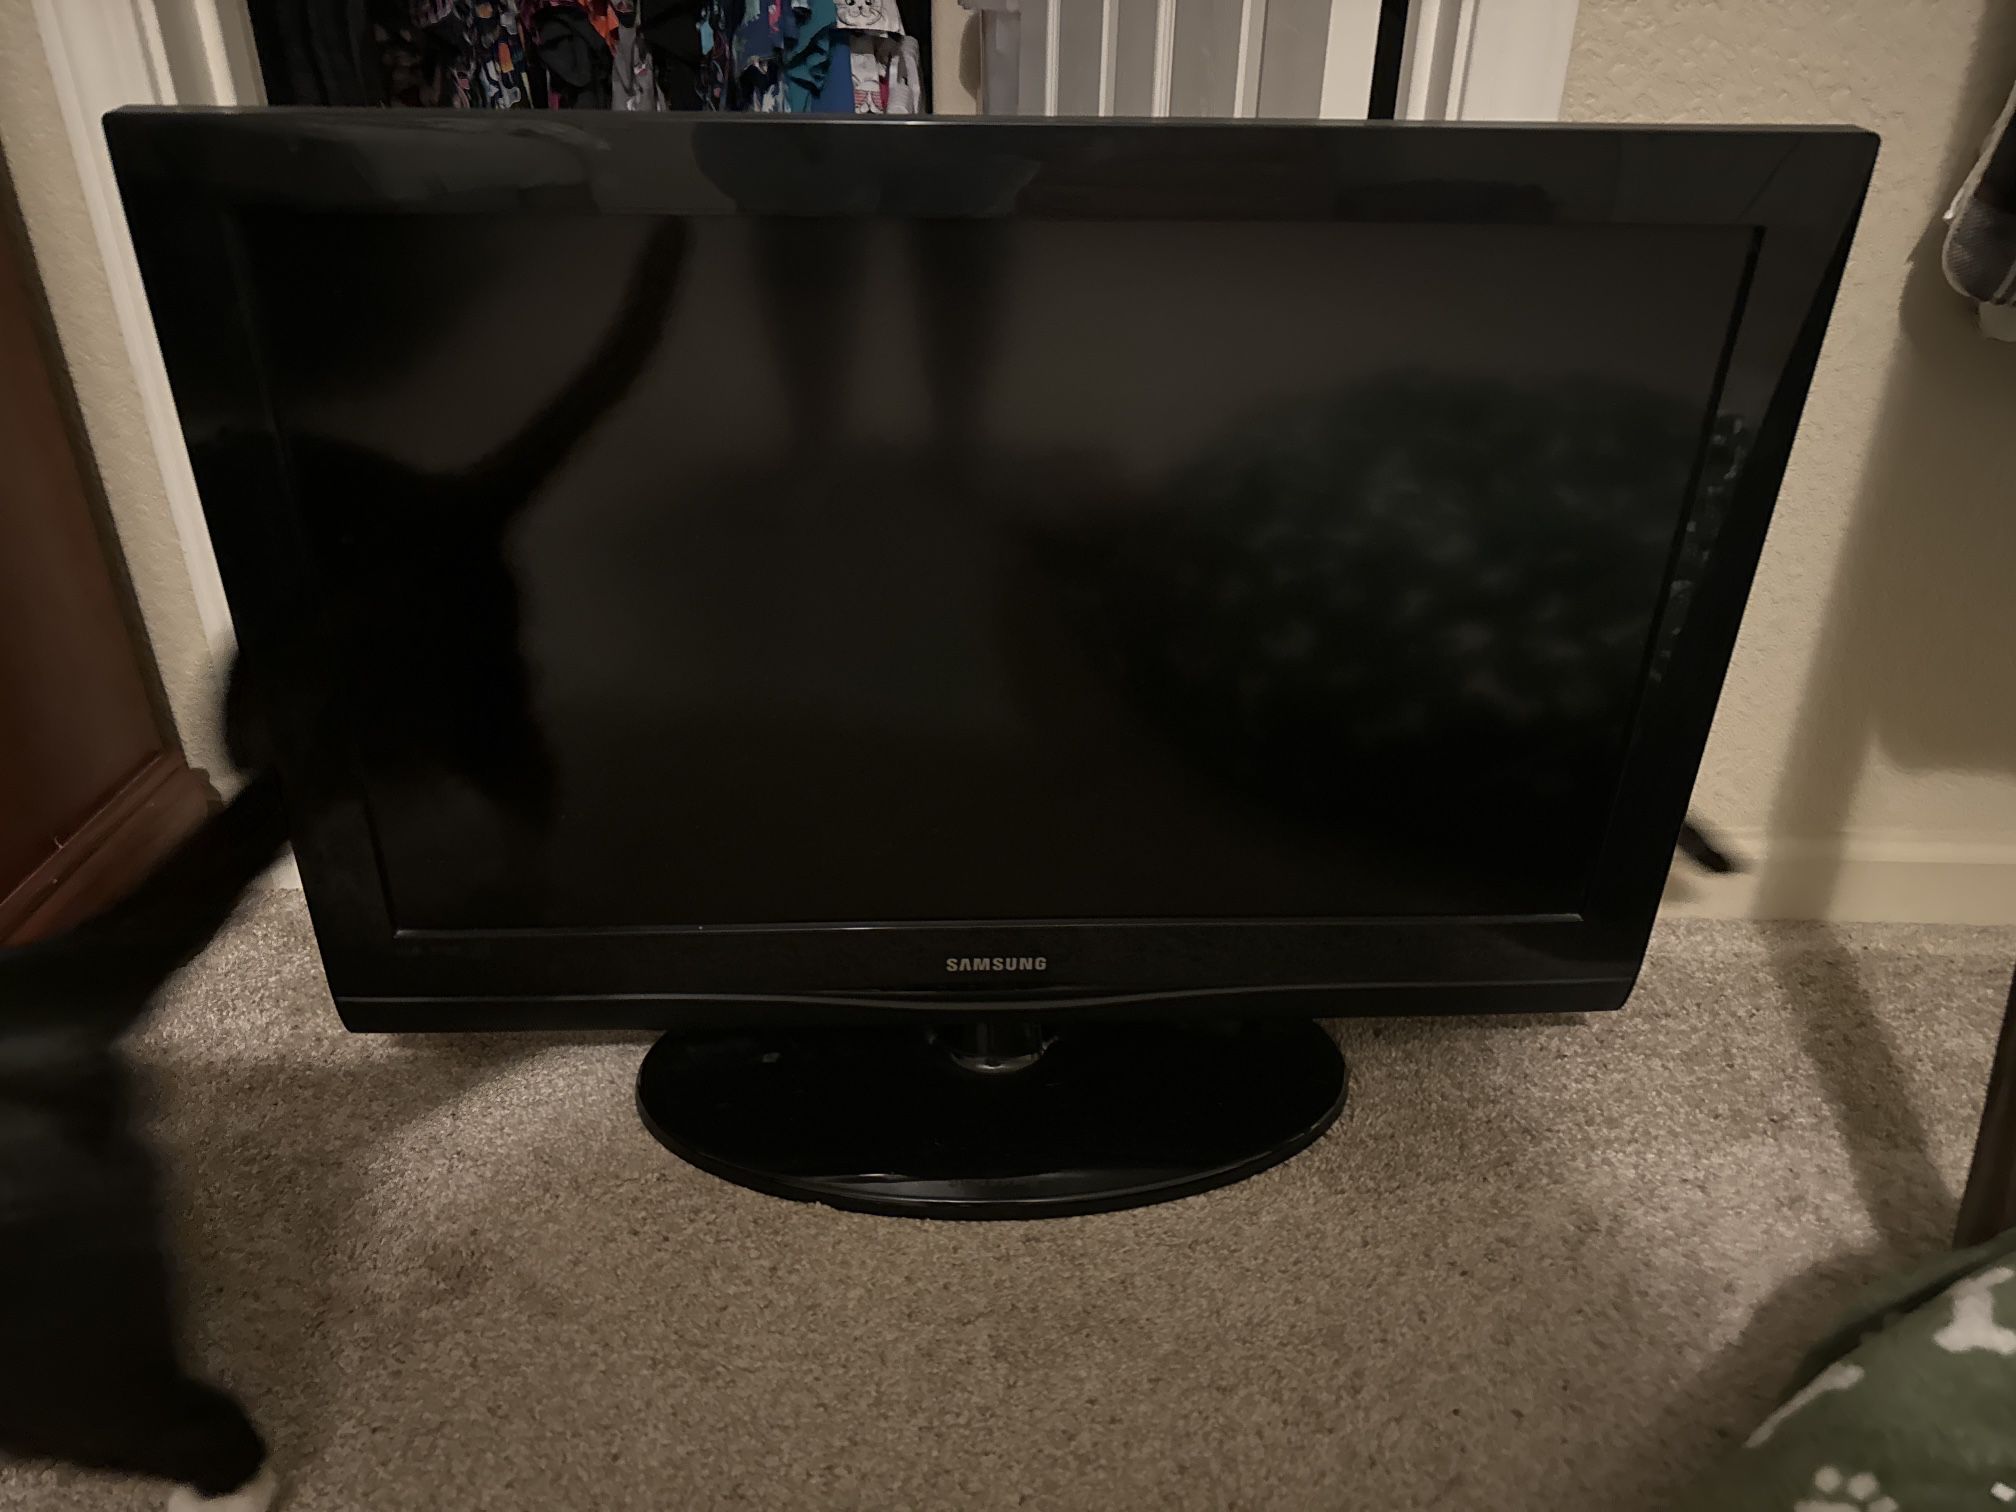 Samsung 32 Inch TV APPLE TV INCLUDED!!!